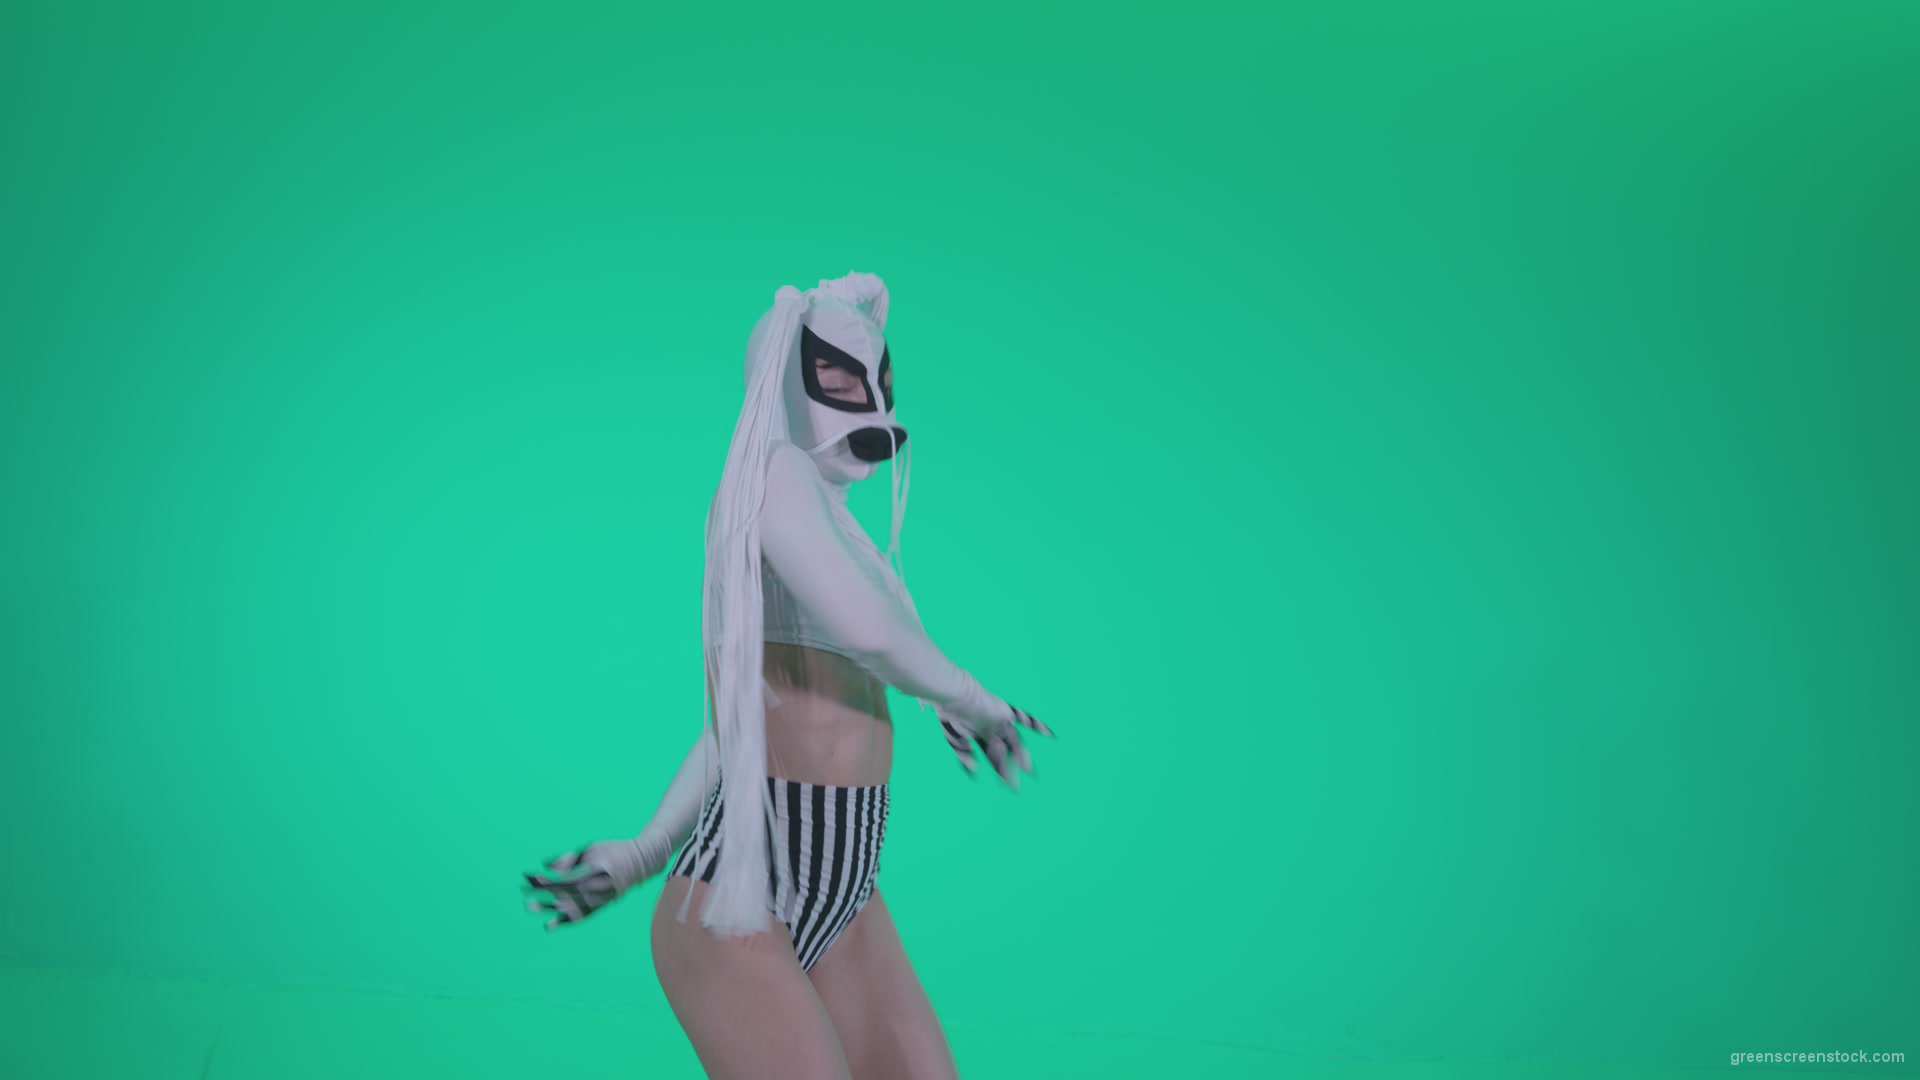 Go-go-Dancer-with-Latex-Top-t9-Green-Screen-Video-Footage_005 Green Screen Stock